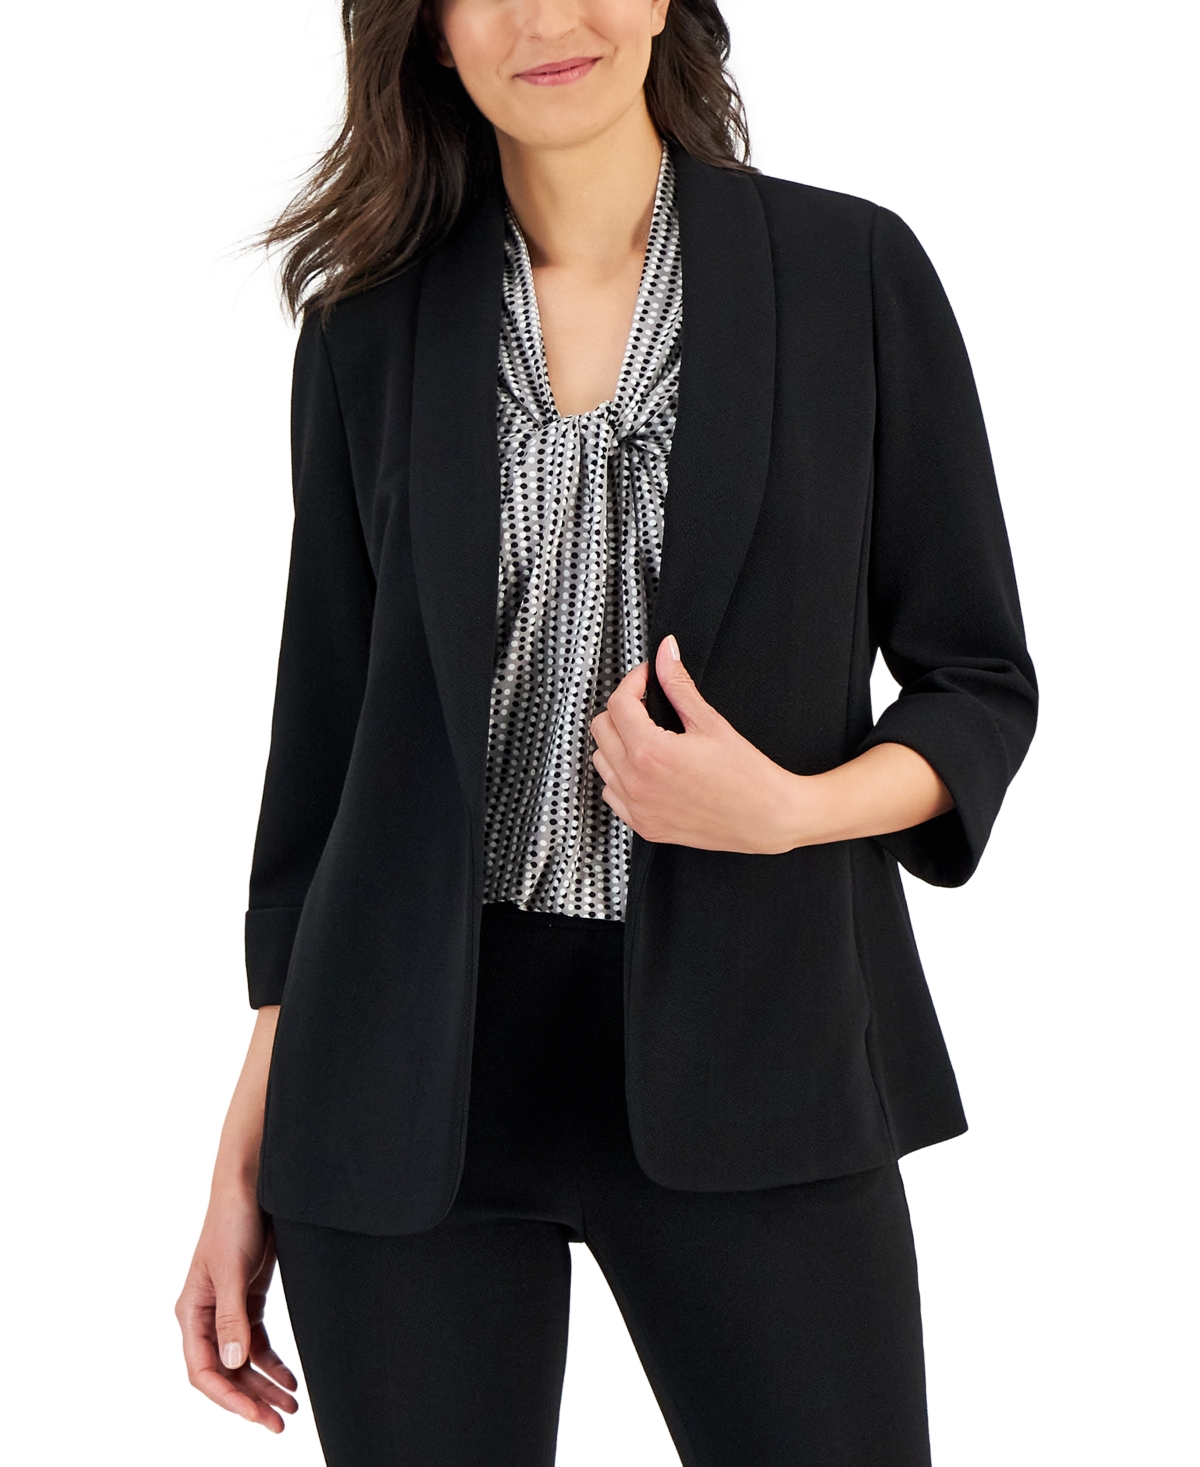 Women's Stretch Crepe Open-Front Roll-Sleeve Jacket